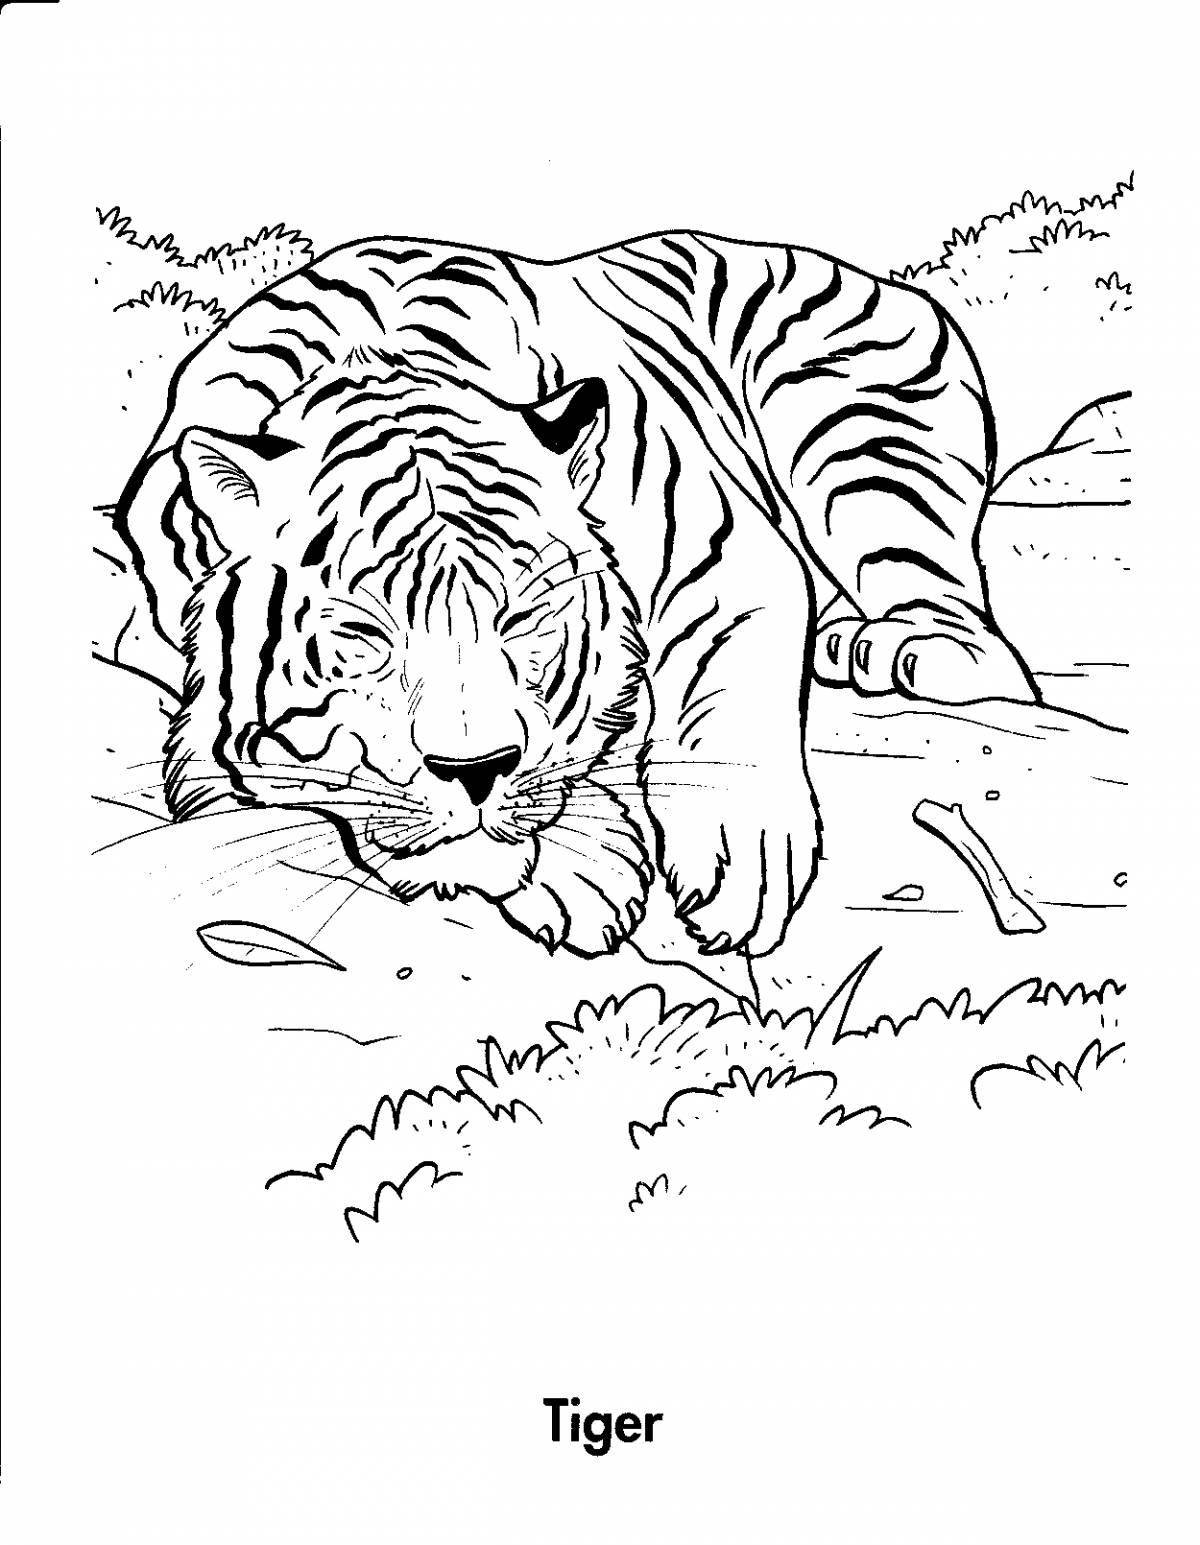 Radiant tiger coloring book for children 6-7 years old